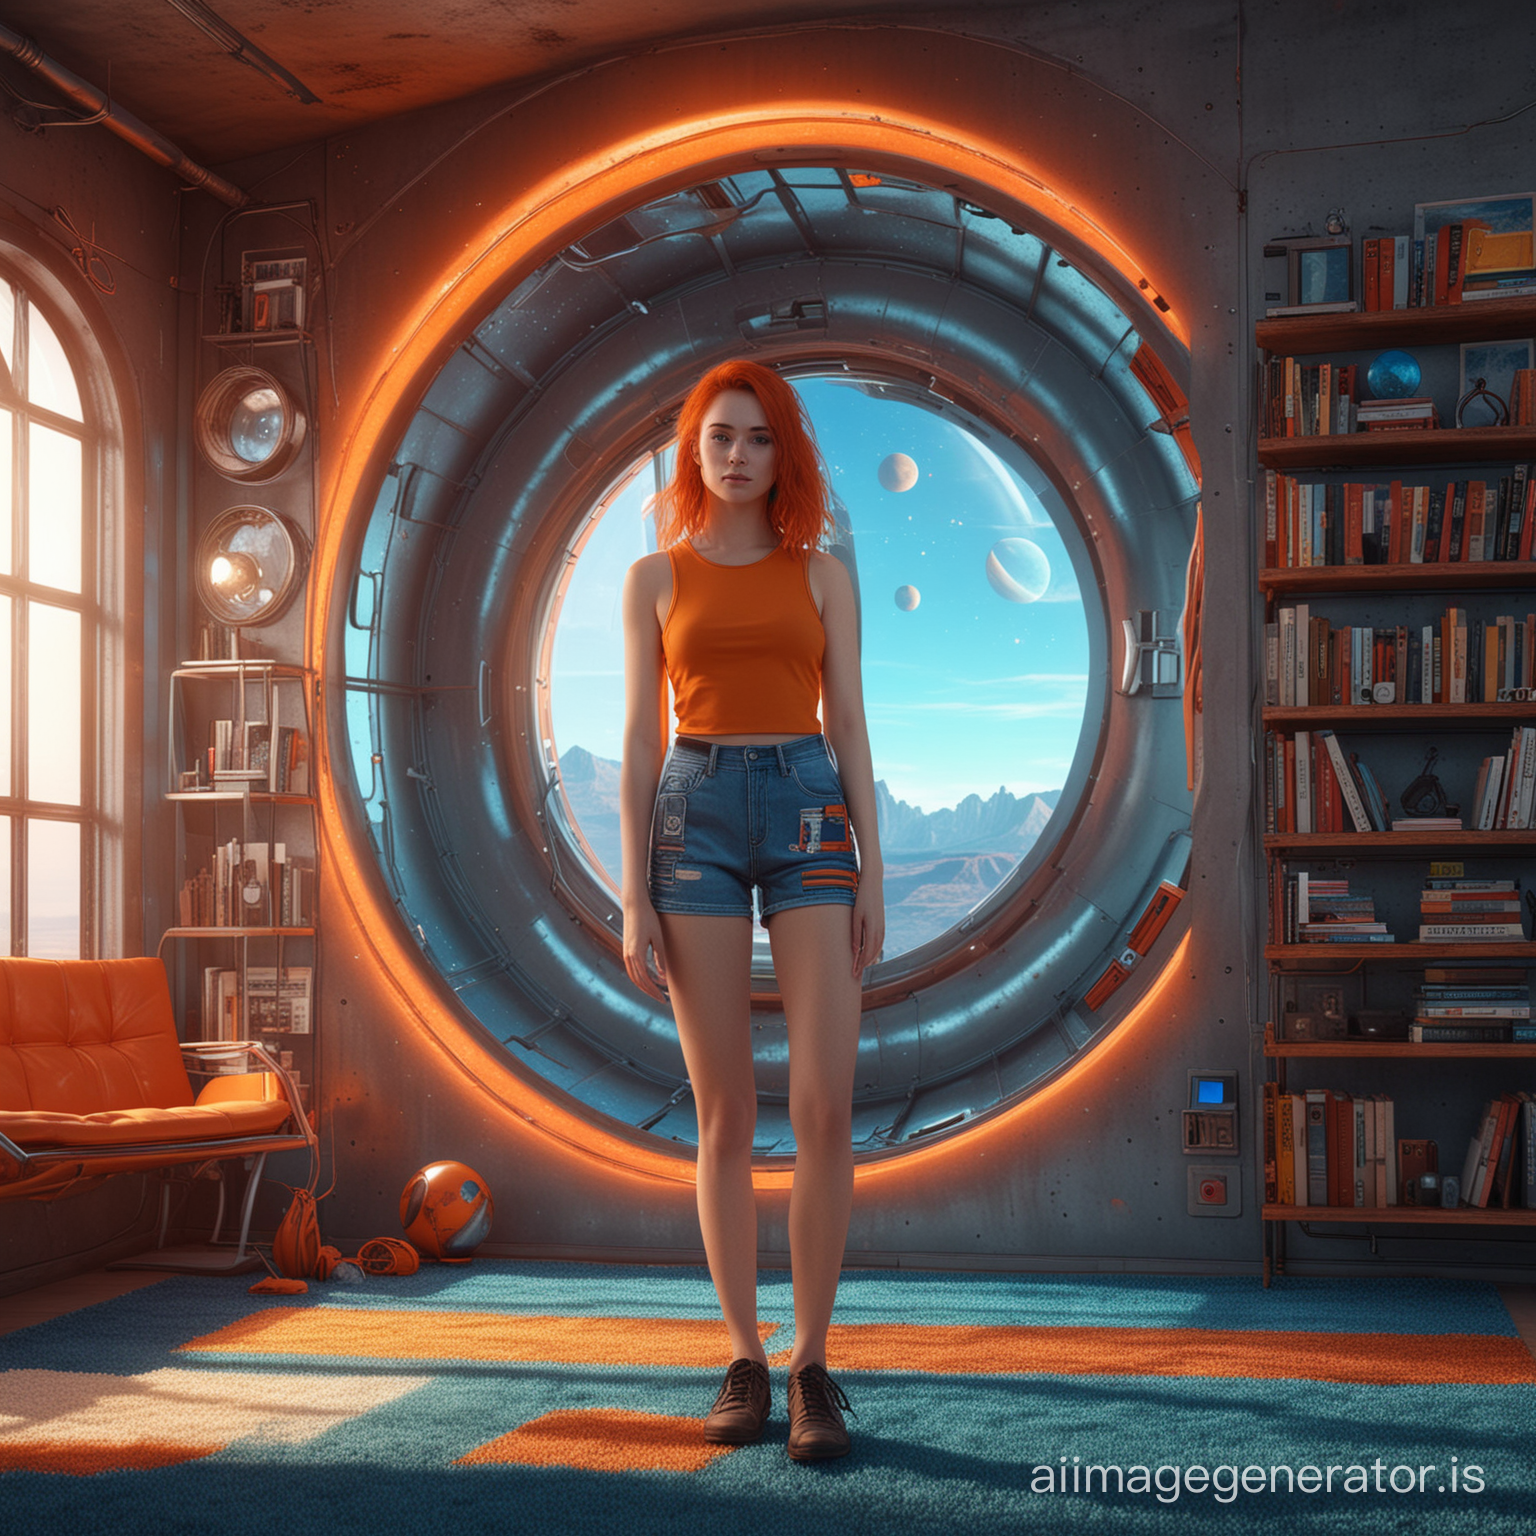  From near side, standing by window. Sci-fi design cozy 3D metal capsule apartment in a spacestation. Red planet. Sun. Sci-fi space 3D feeling. Bookshelf. Screens. Stained-glass blue round window with reflection and Orange LED. Colorful carpet. Full body side view. Good-looking teen women with freckles curious detailed eyes and smile. Tight tanktop and slinky shorts. Ultra realistic. Wide angle.